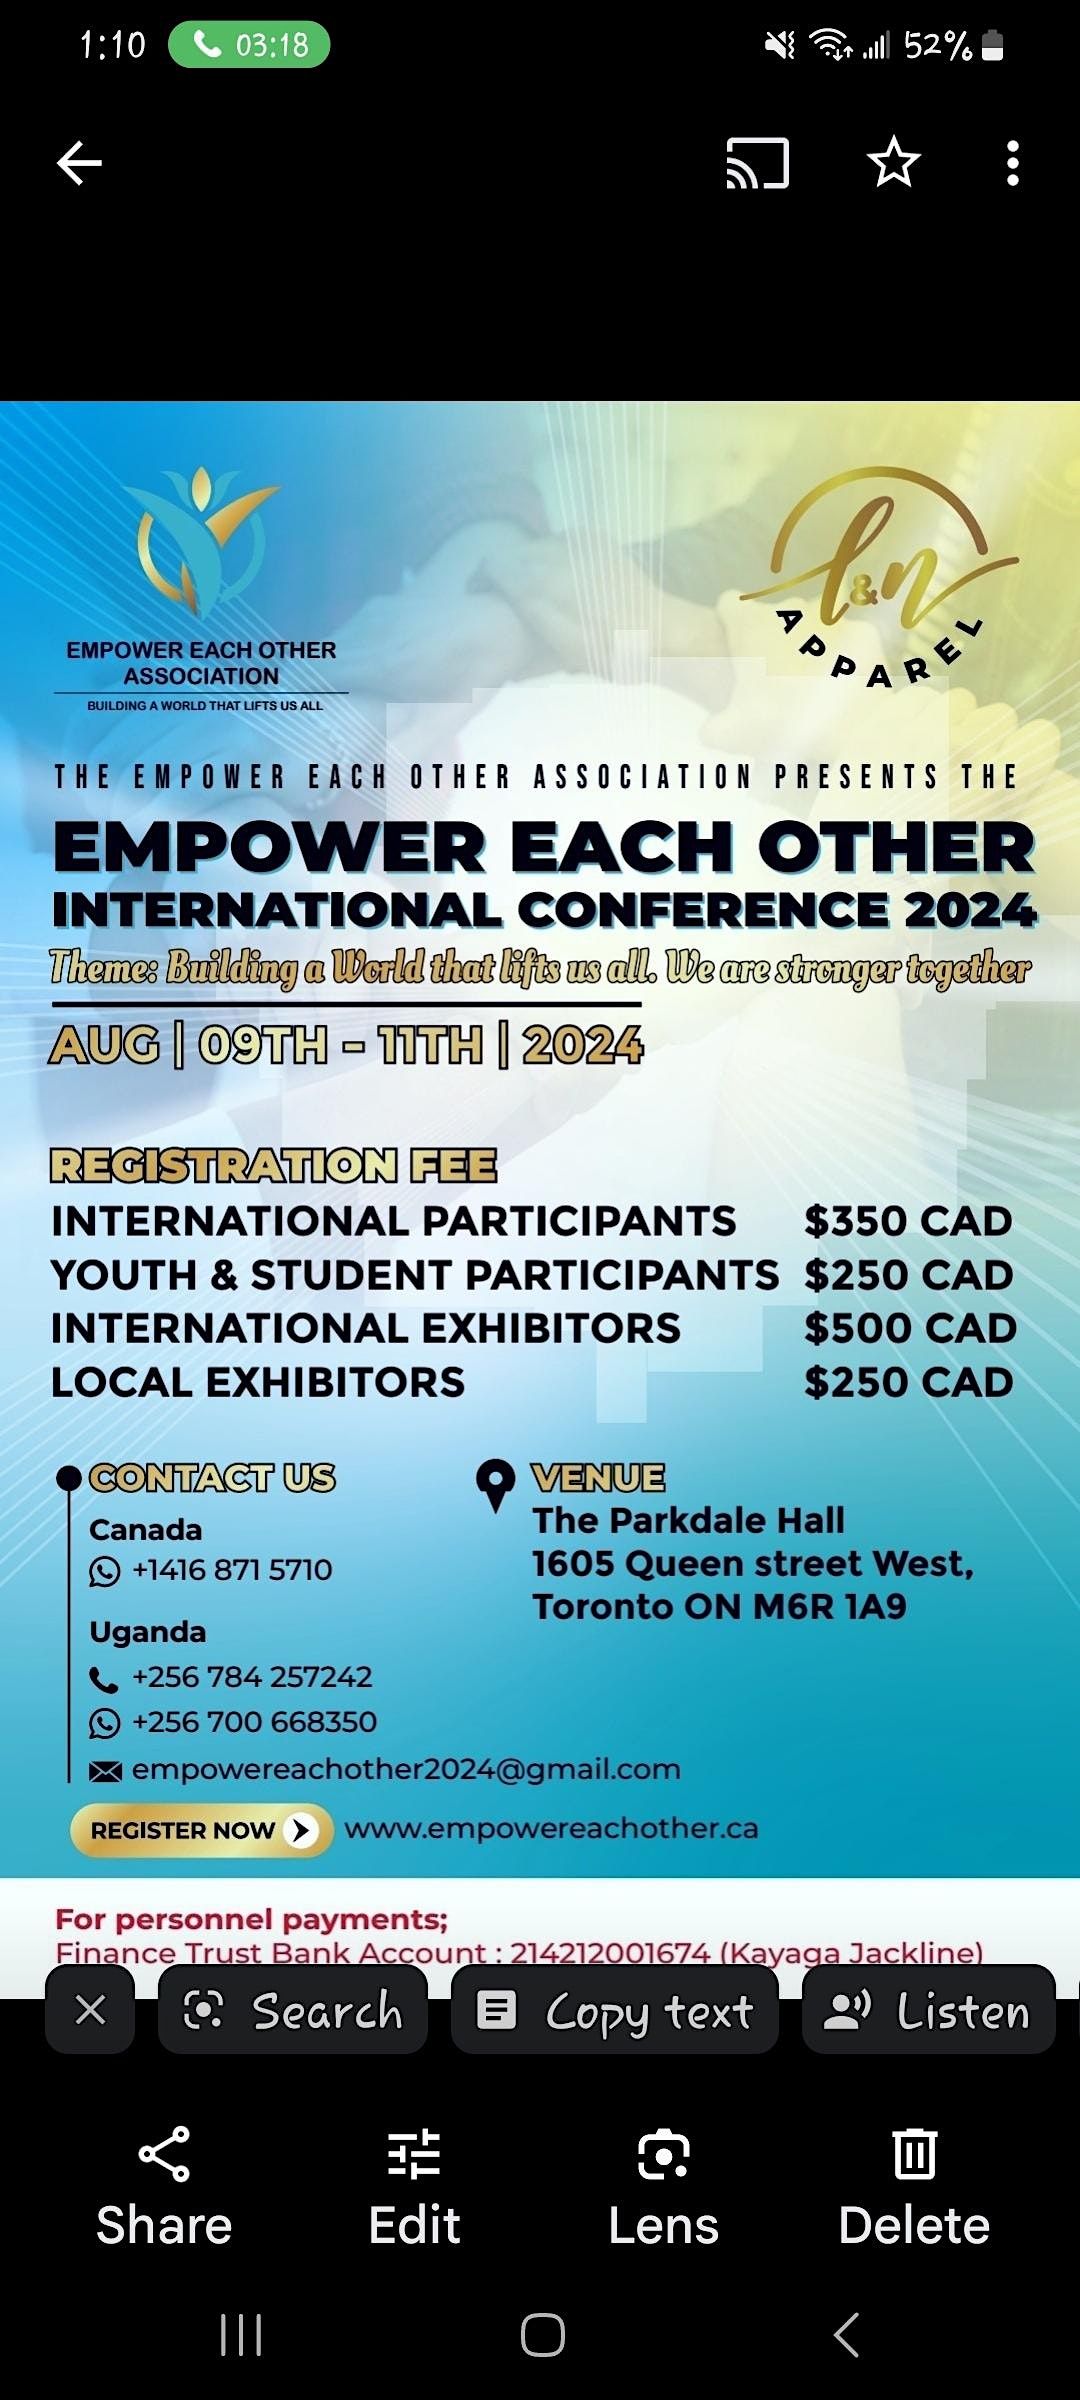 EMPOWER EACH OTHER INTERNATIONAL CONFERENCE 2024